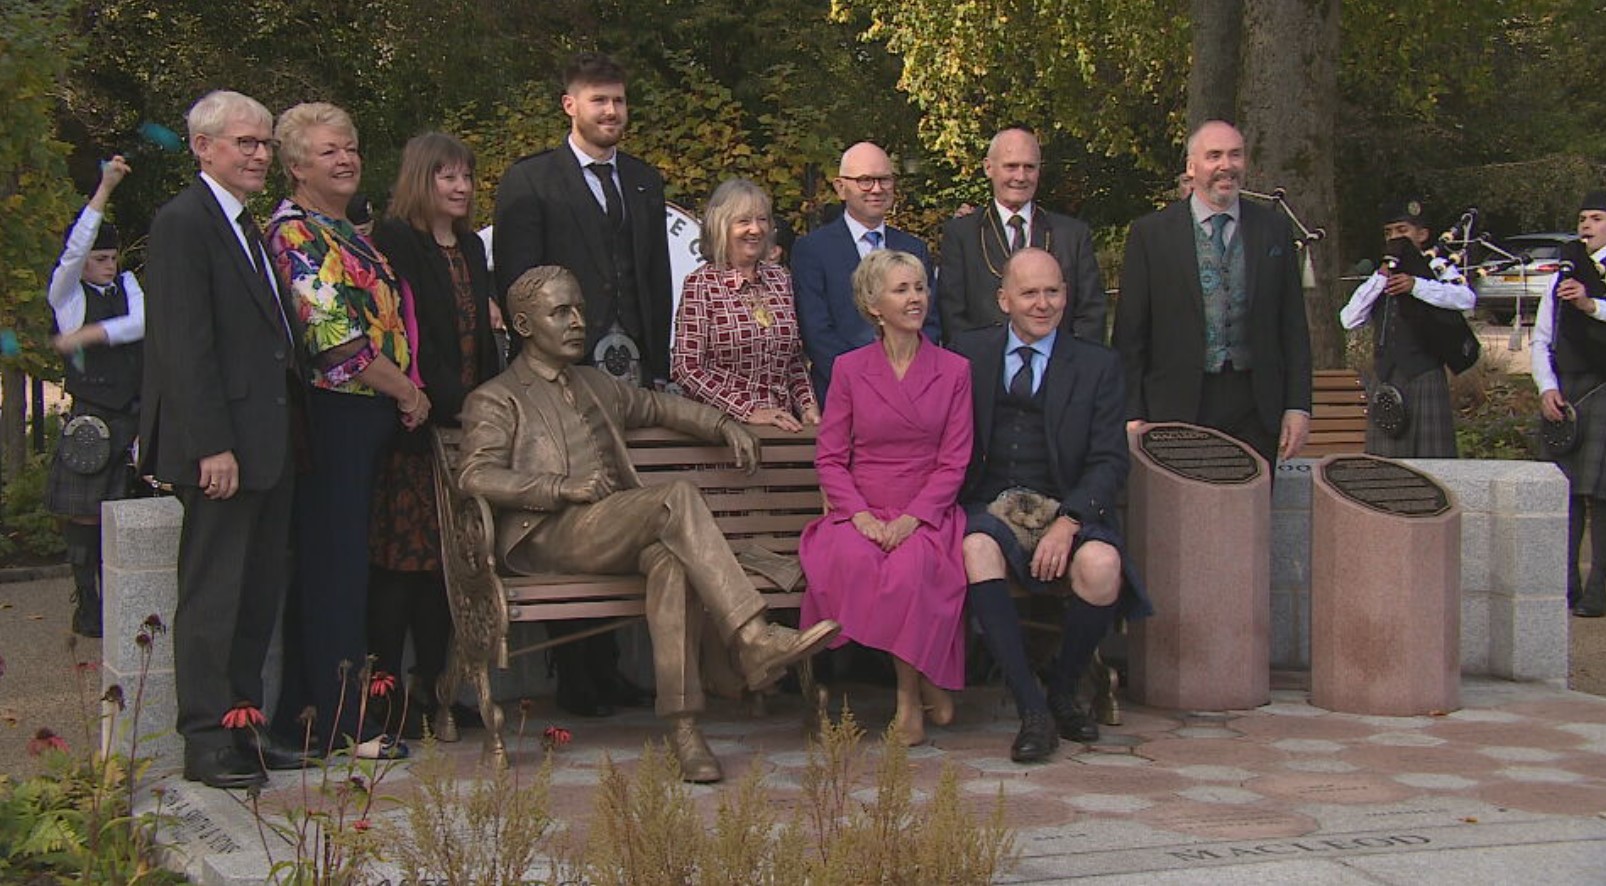 Family of John J.R. Macleod attended the unveiling ceremony